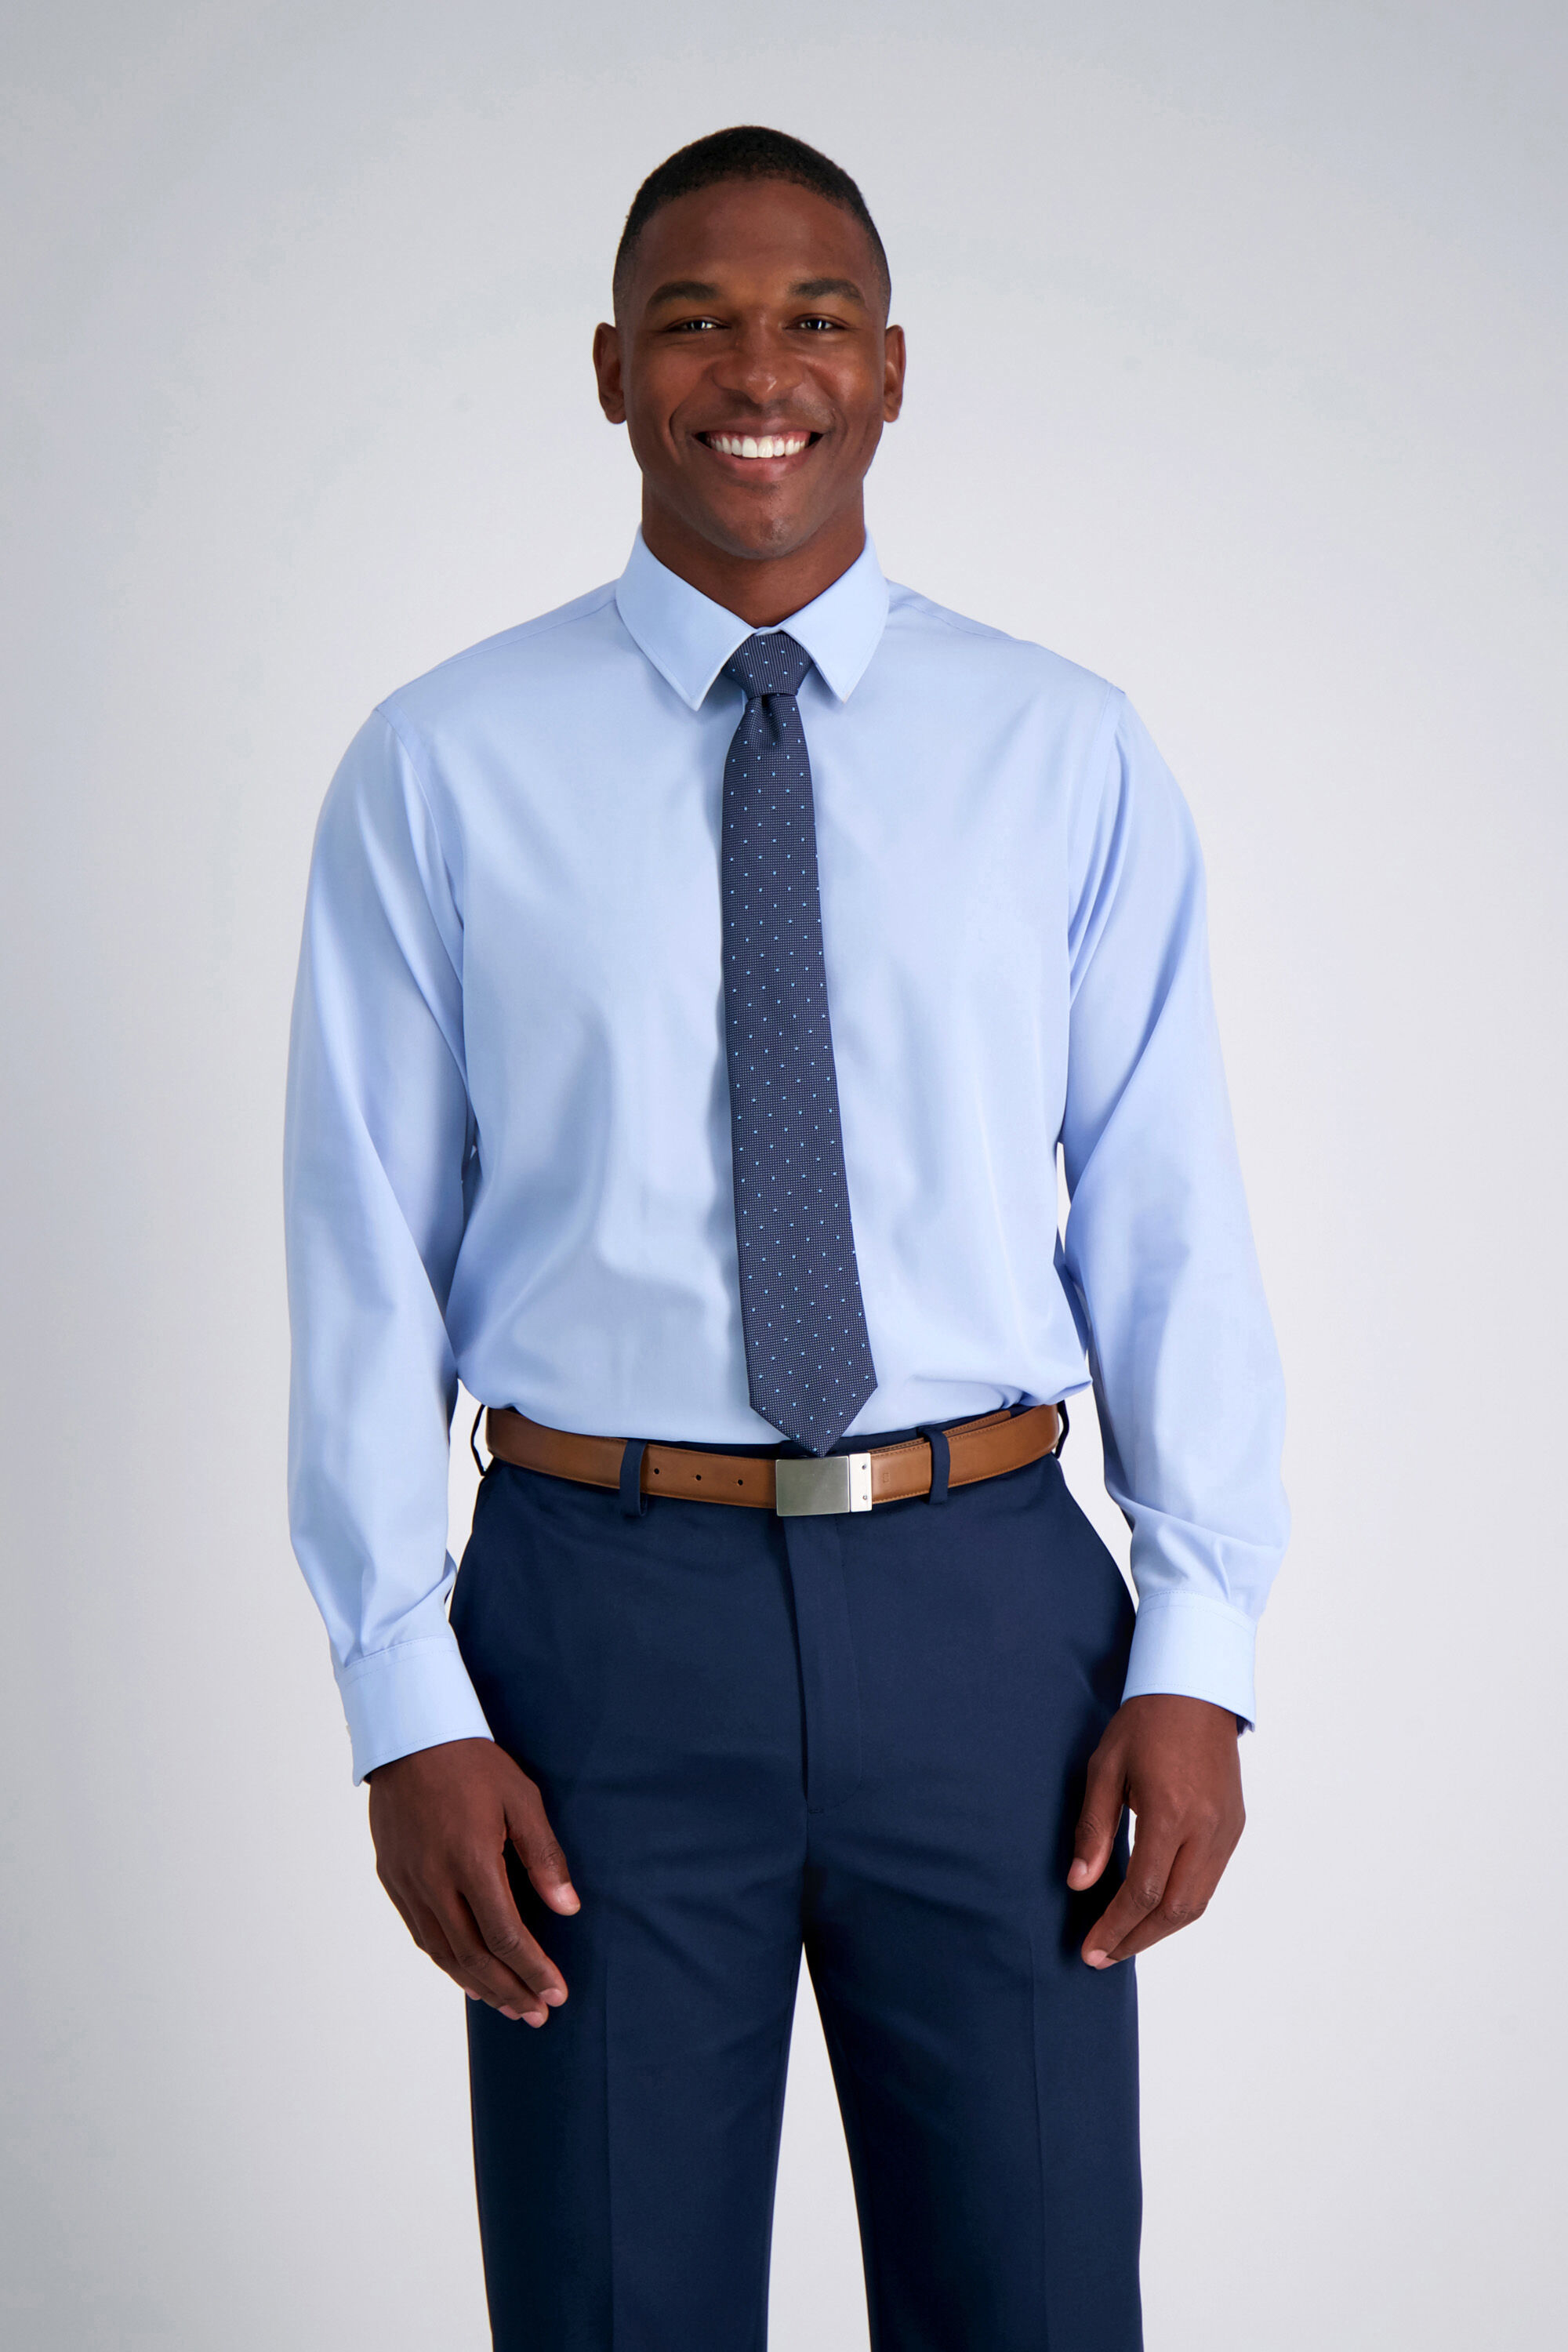 Can I wear a light blue dress shirt with blue pants This is for an  interview with a large tech company casual  business casual wear with  British tan belt and shoes